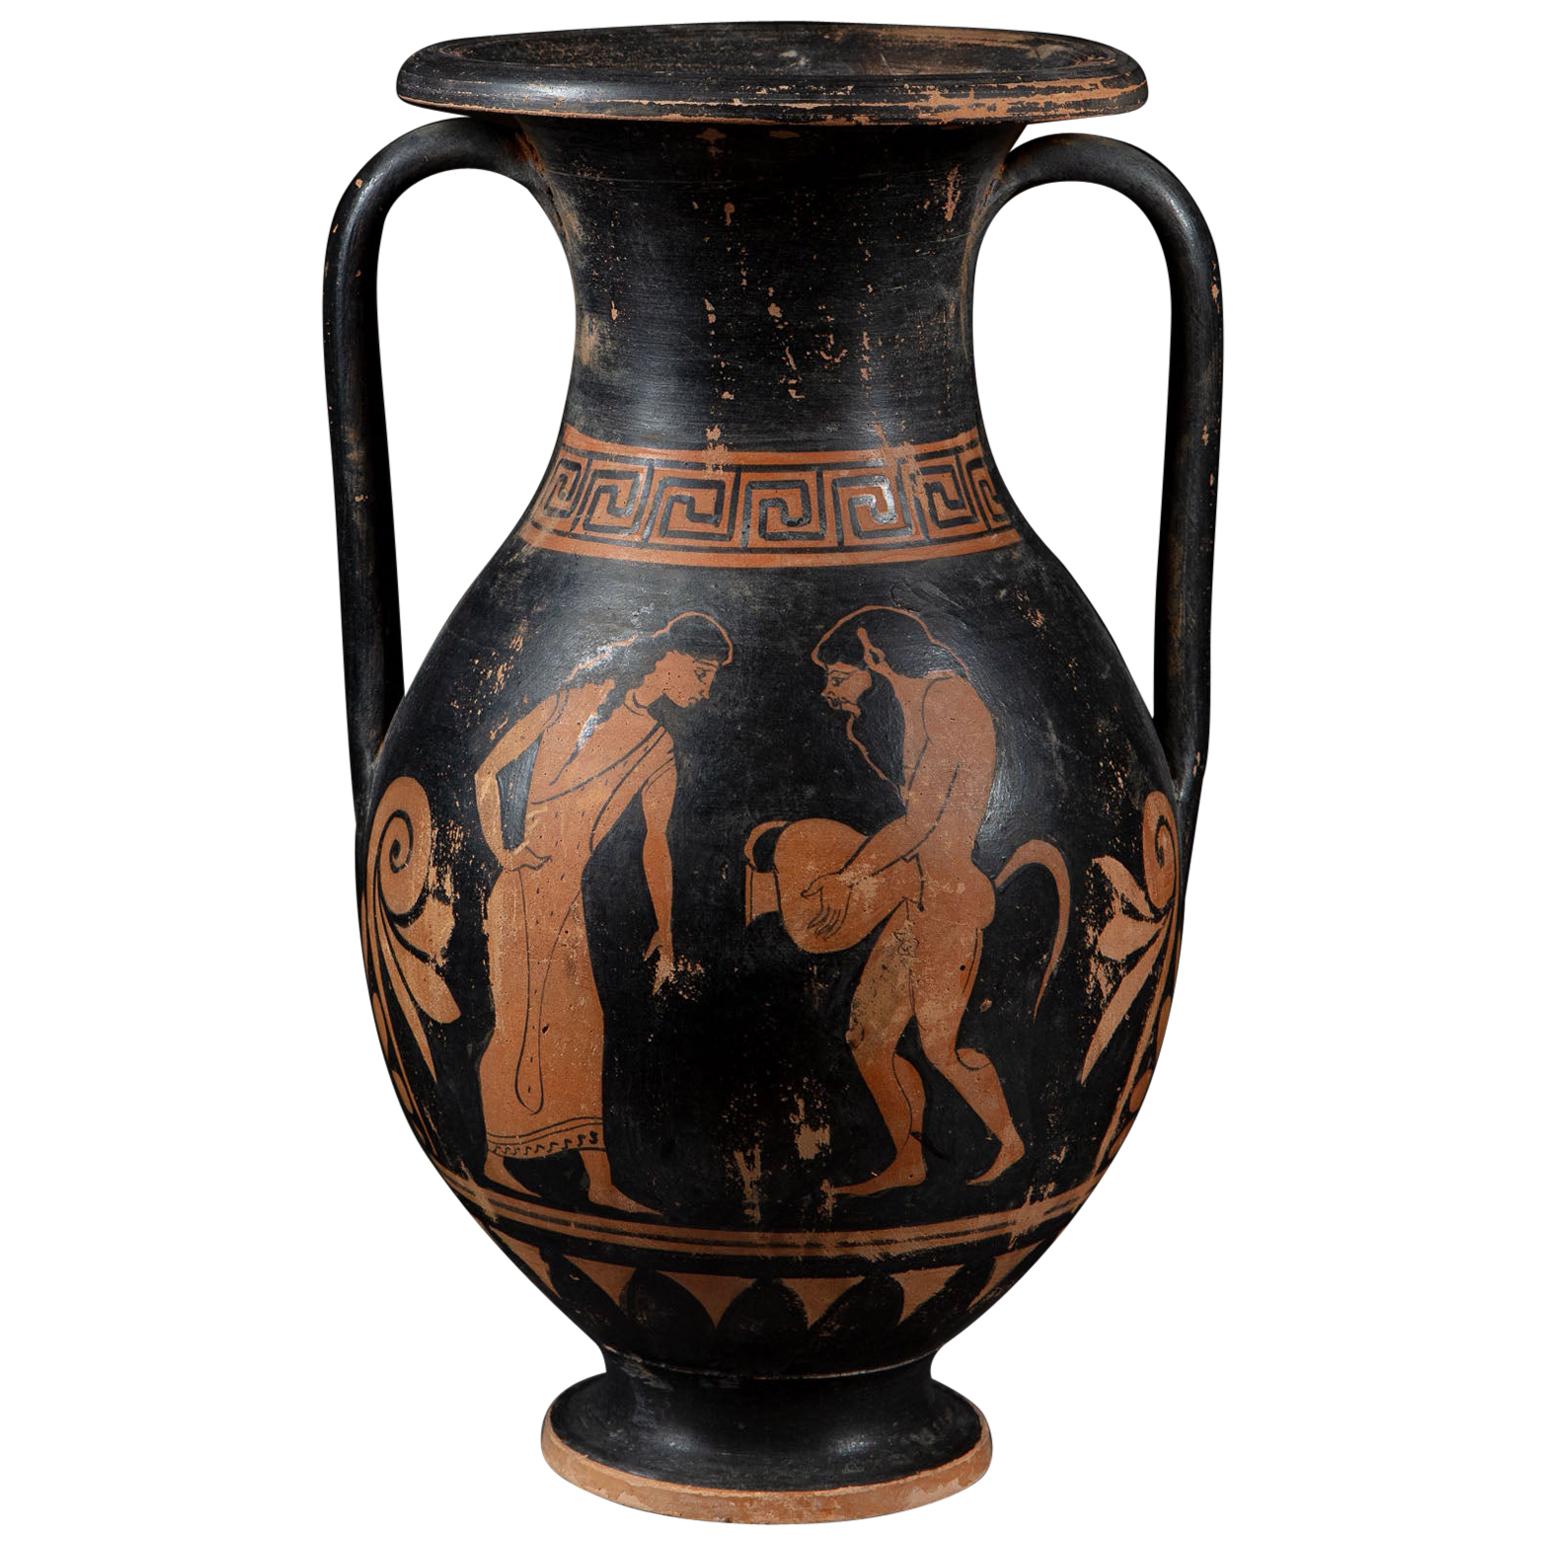 19th Century Grand Tour Greek Terracotta Vessel of Amphora Form, Black and Brown